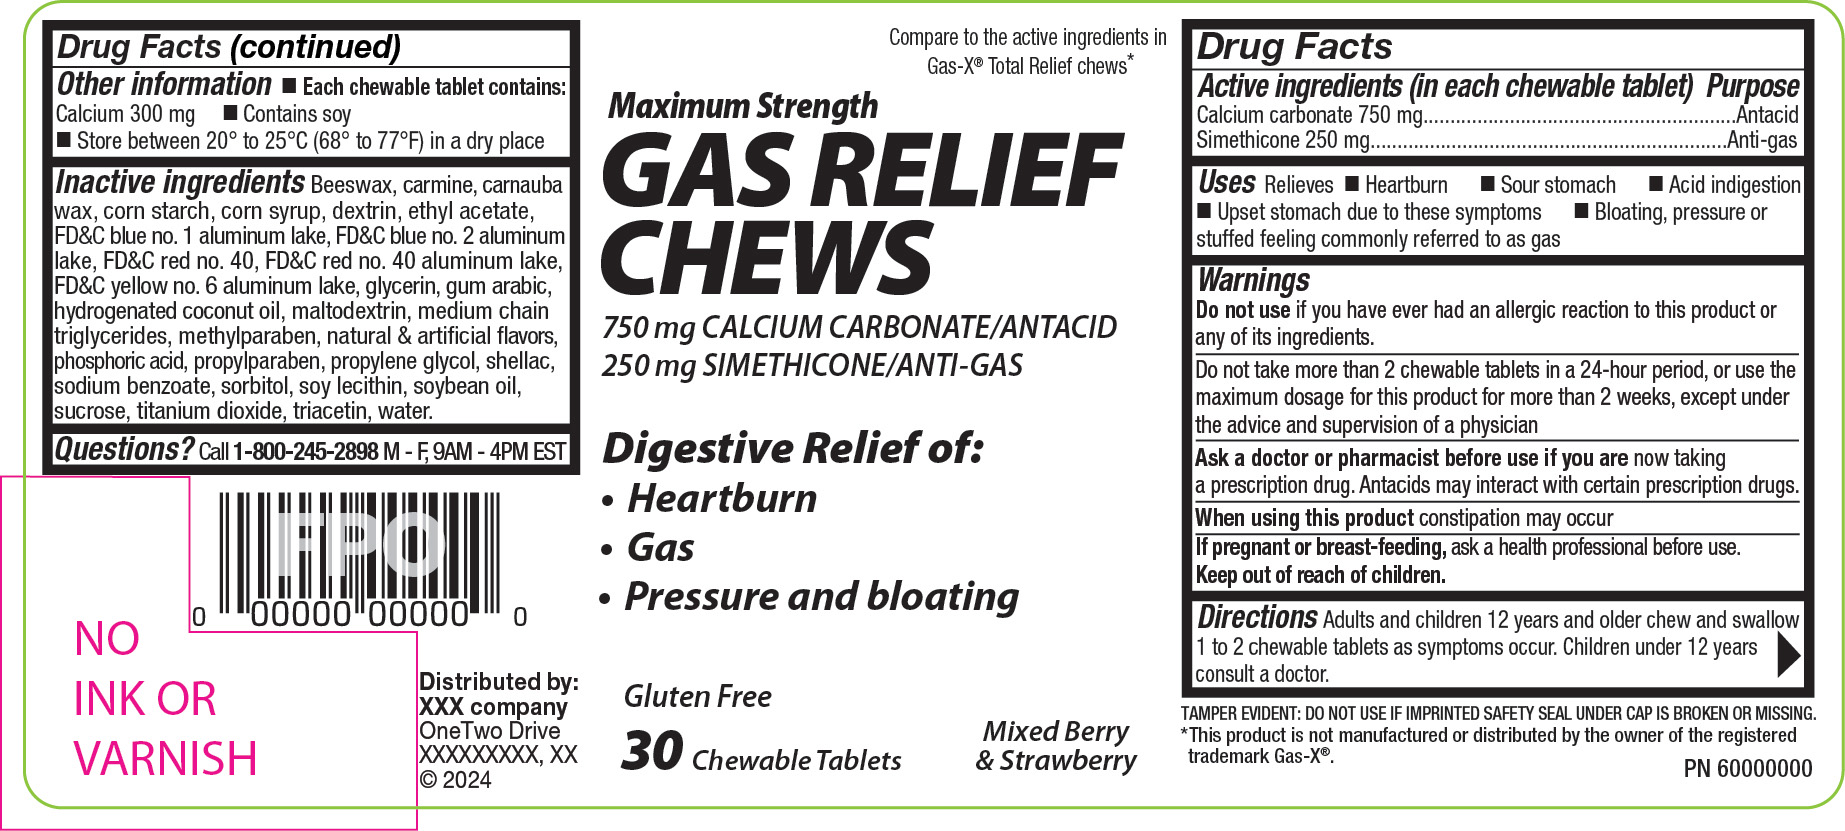 Target Mixed Berry and Strawberry Gas Relief Chews